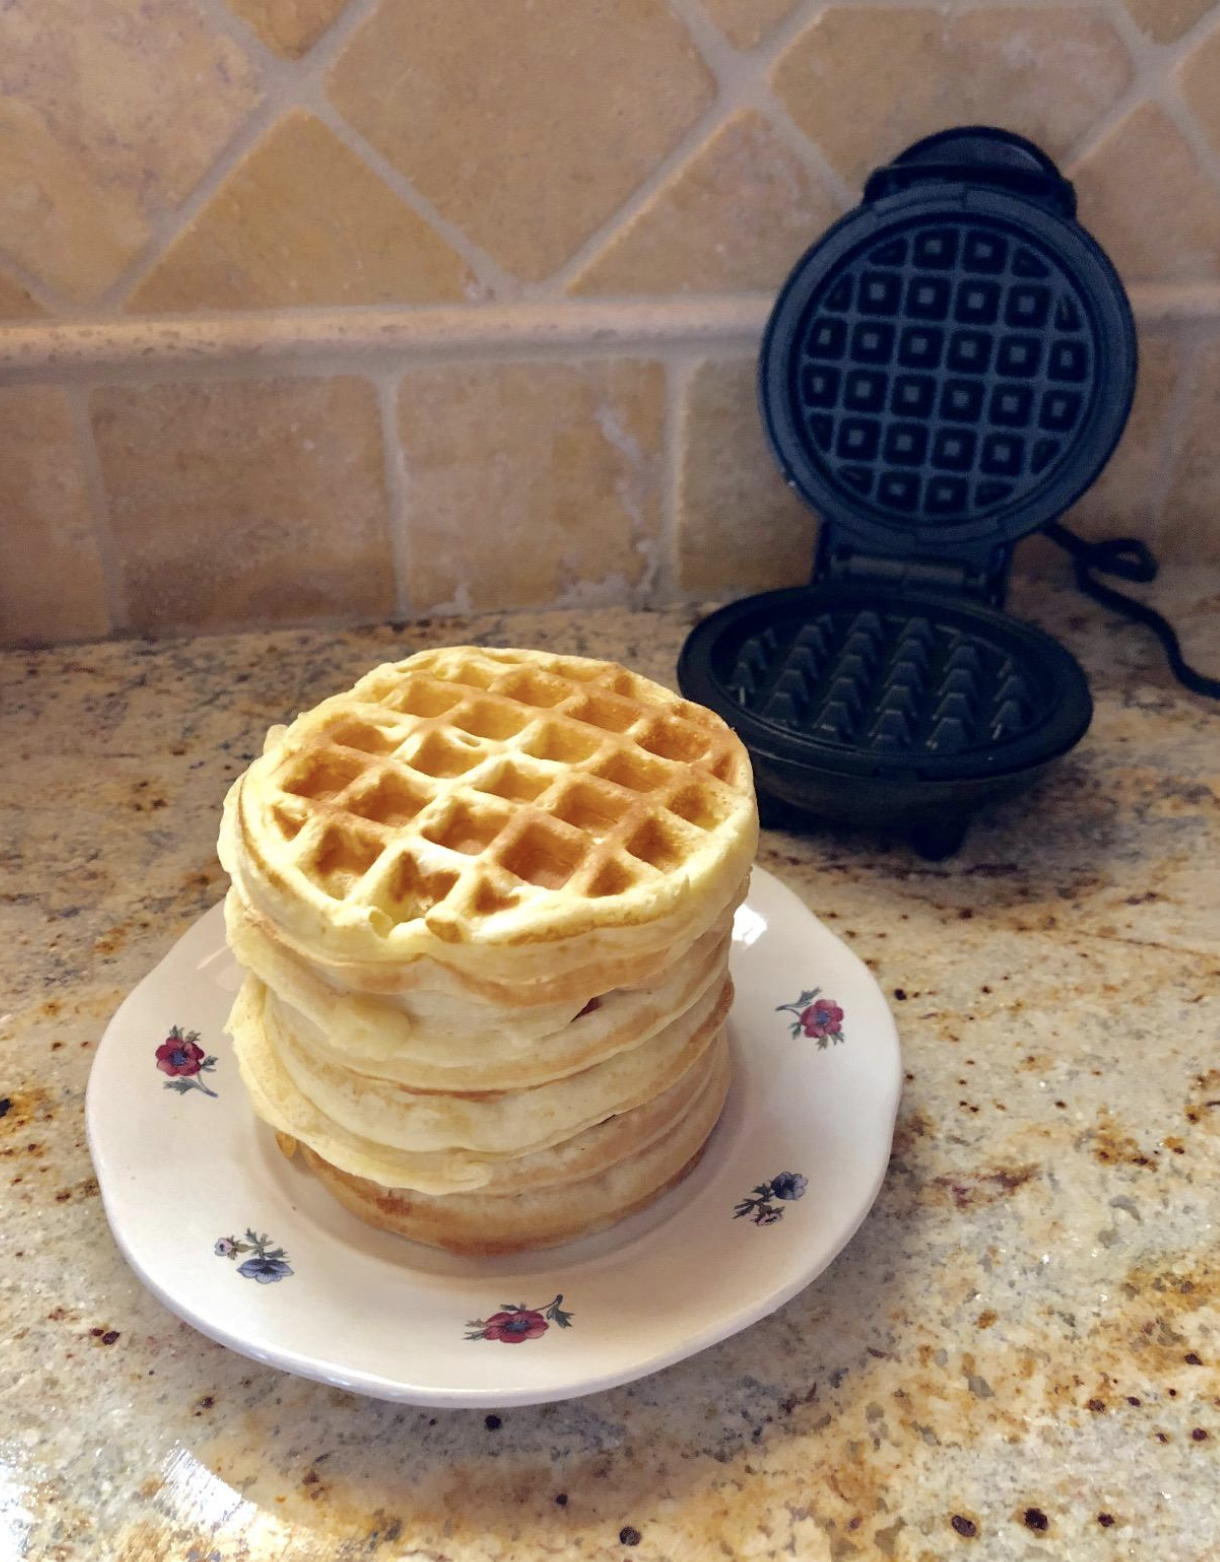 the mini singe waffle maker next to a plate with a stack of small waffles